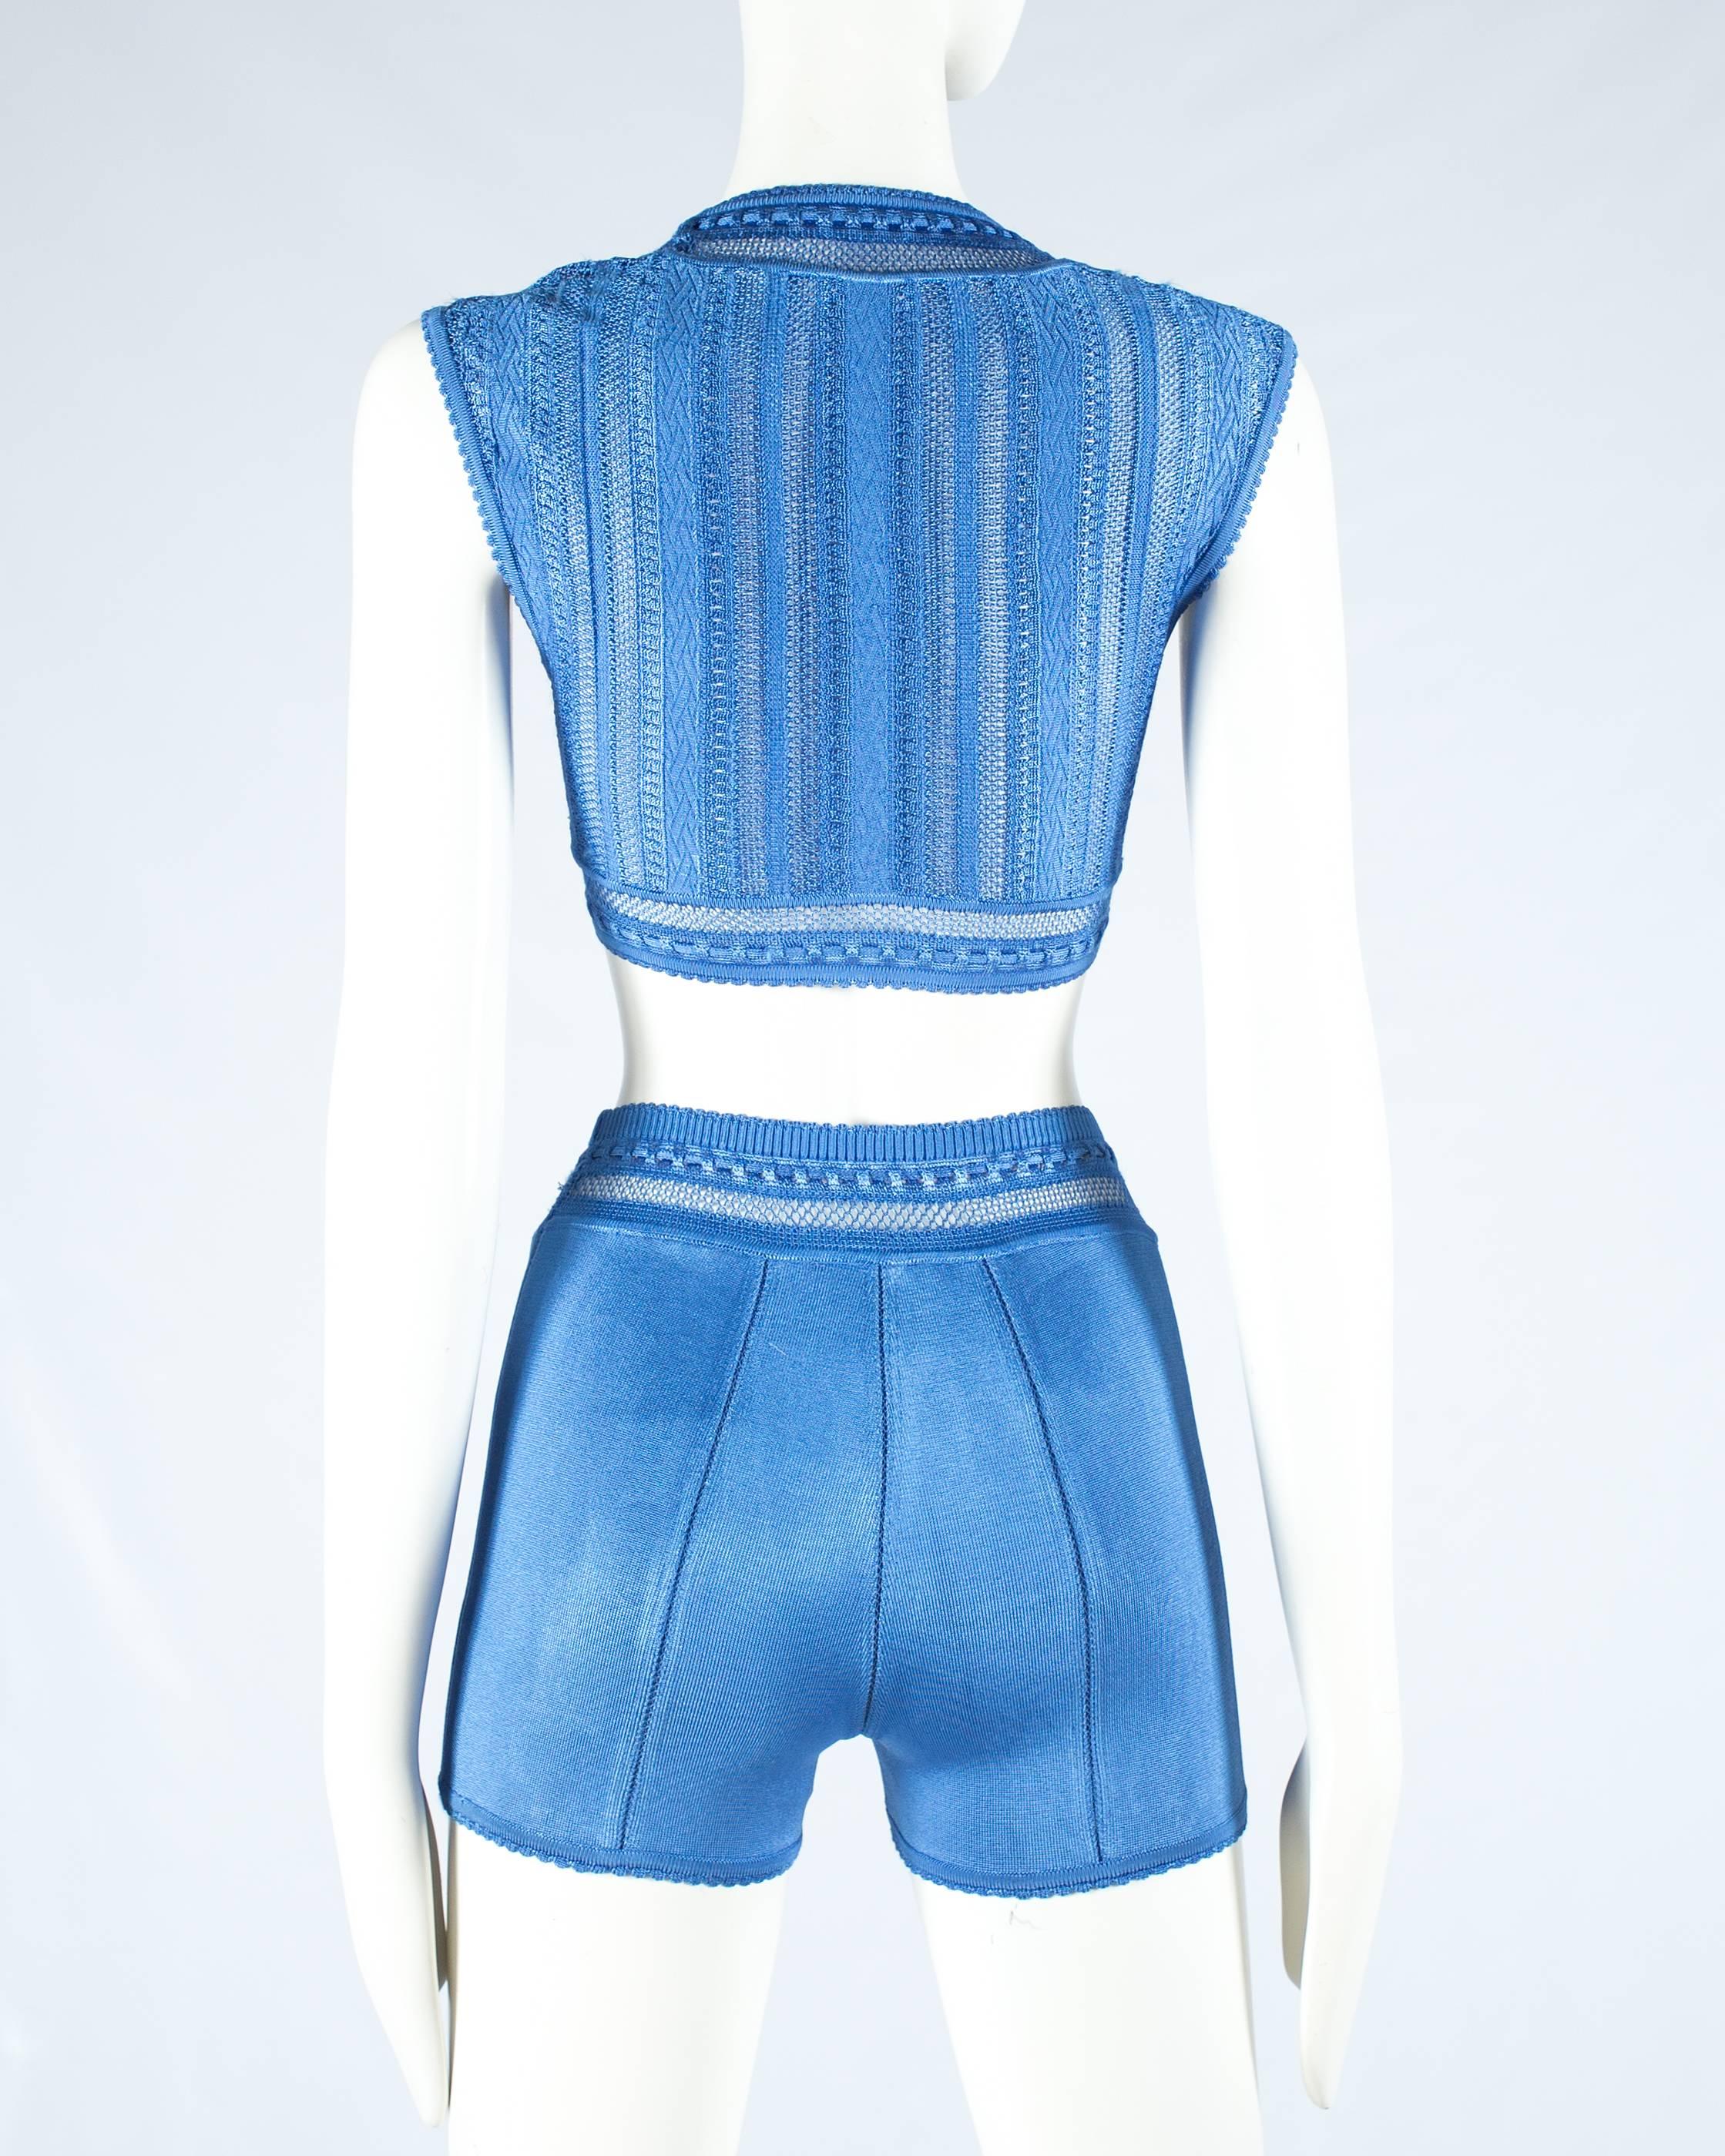 Azzedine Alaia blue acetate knitted high waisted shorts and bra top, ss 1993 1